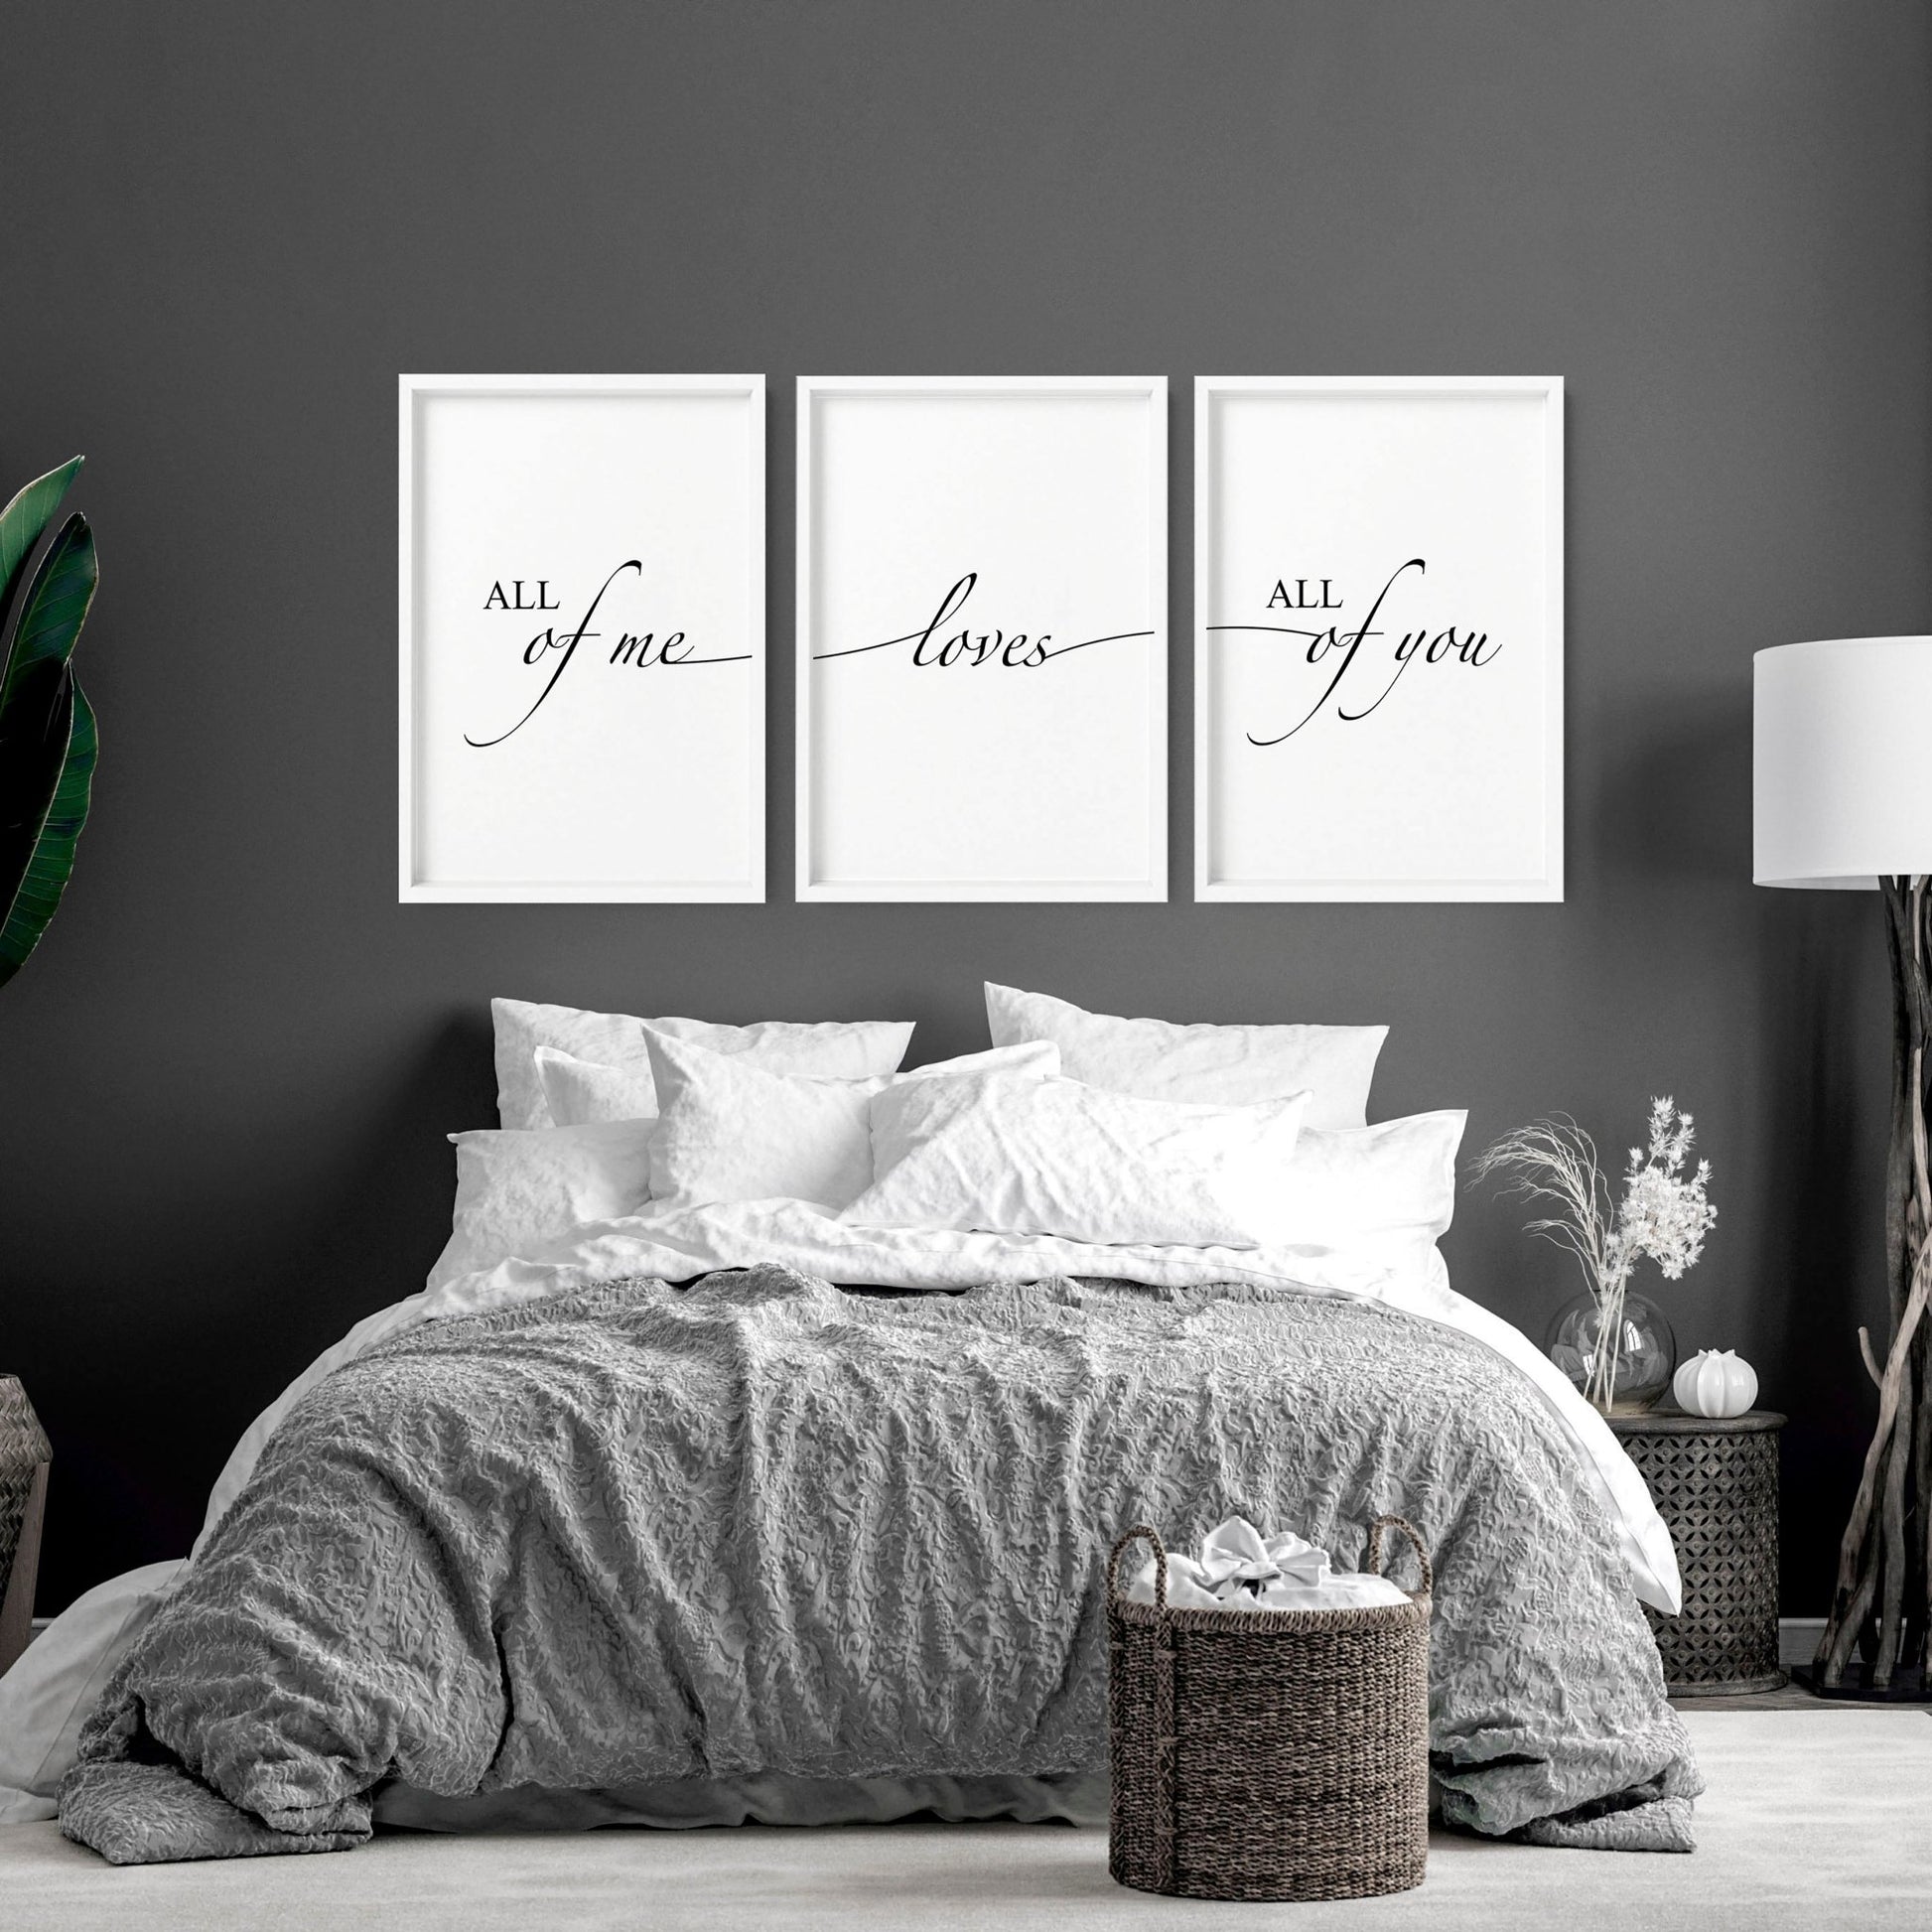 Paper anniversary gift | set of 3 wall art prints for Bedroom - About Wall Art